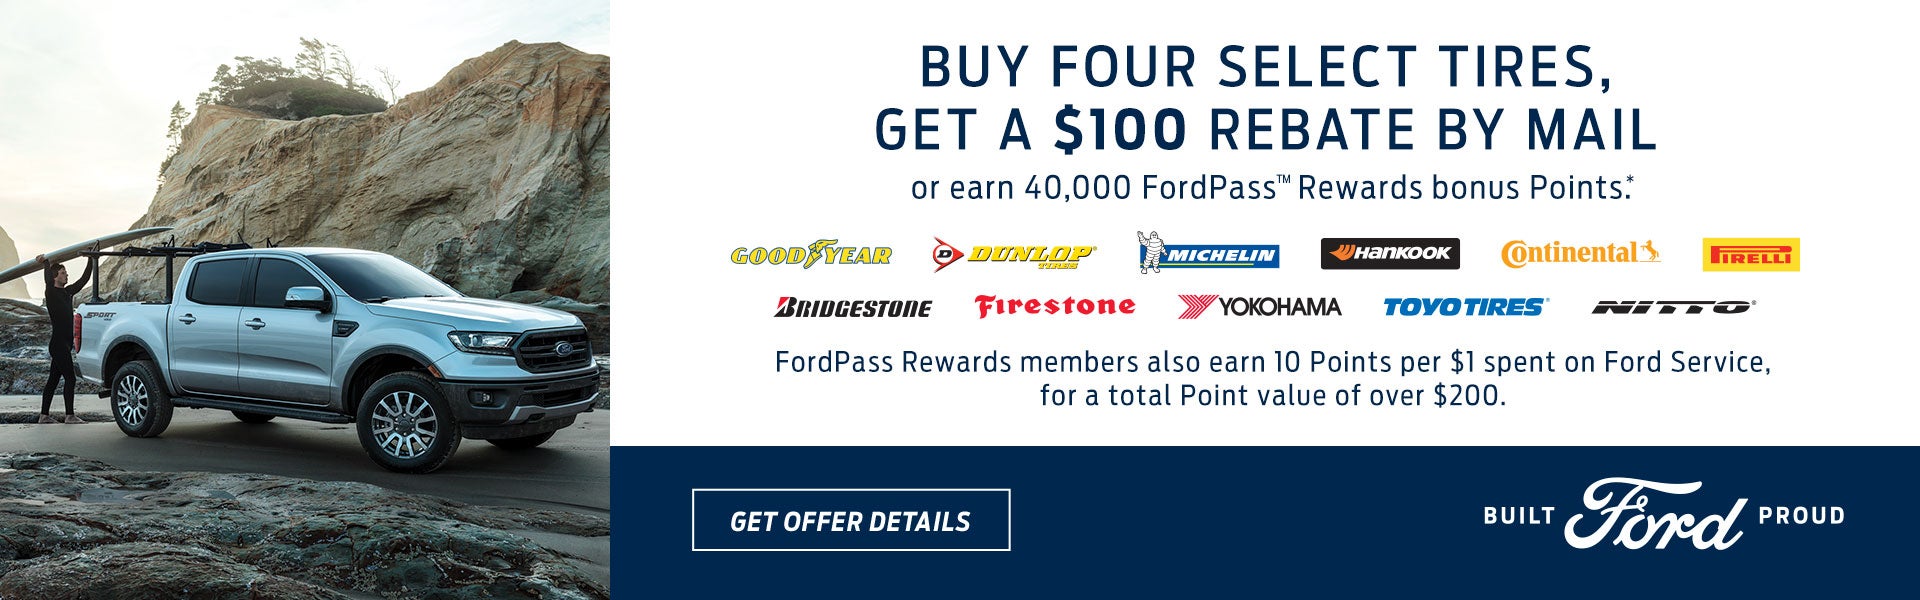 Buy four select tires, get a $70 rebate by mail or earn 30,000 FordPass™ Rewards Bonus Points (over $150 value).* And with the FordPass Rewards Visa, earn 11,000 additional Points** on your first purchase (over $200 value when combined with the bonus offer). Click here to print this offer.